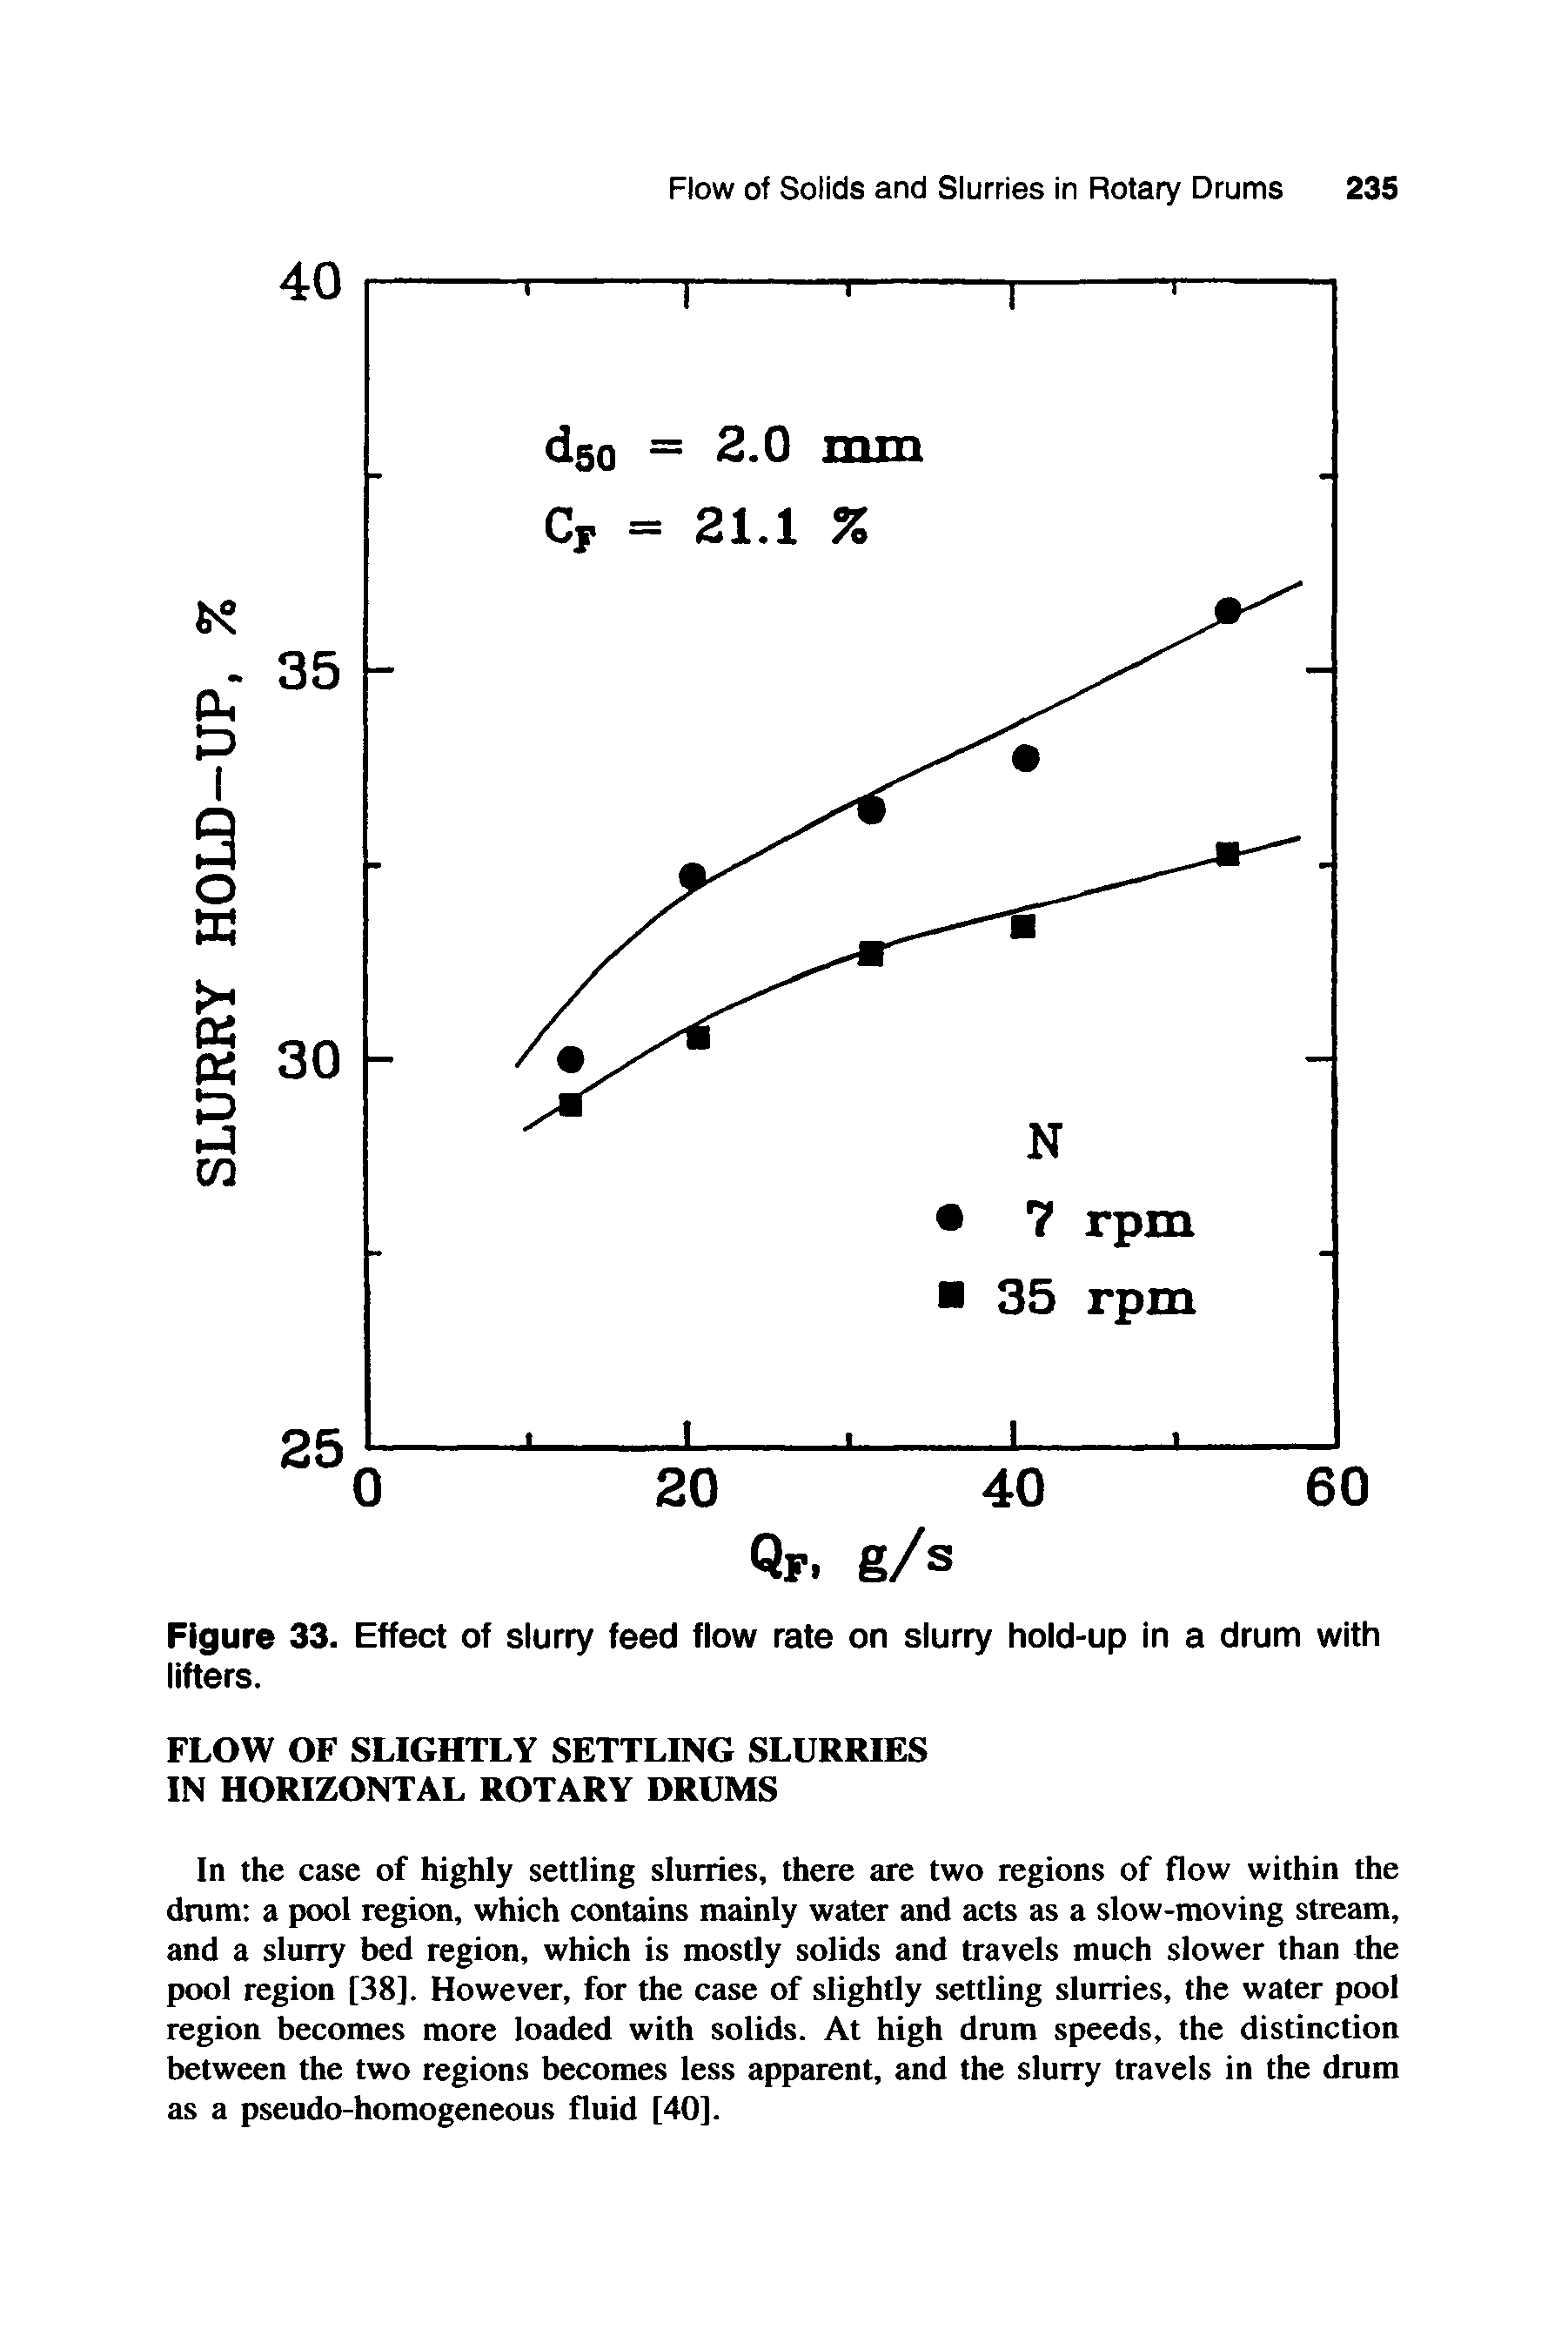 Figure 33. Effect of slurry feed flow rate on slurry hold-up In a drum with lifters.